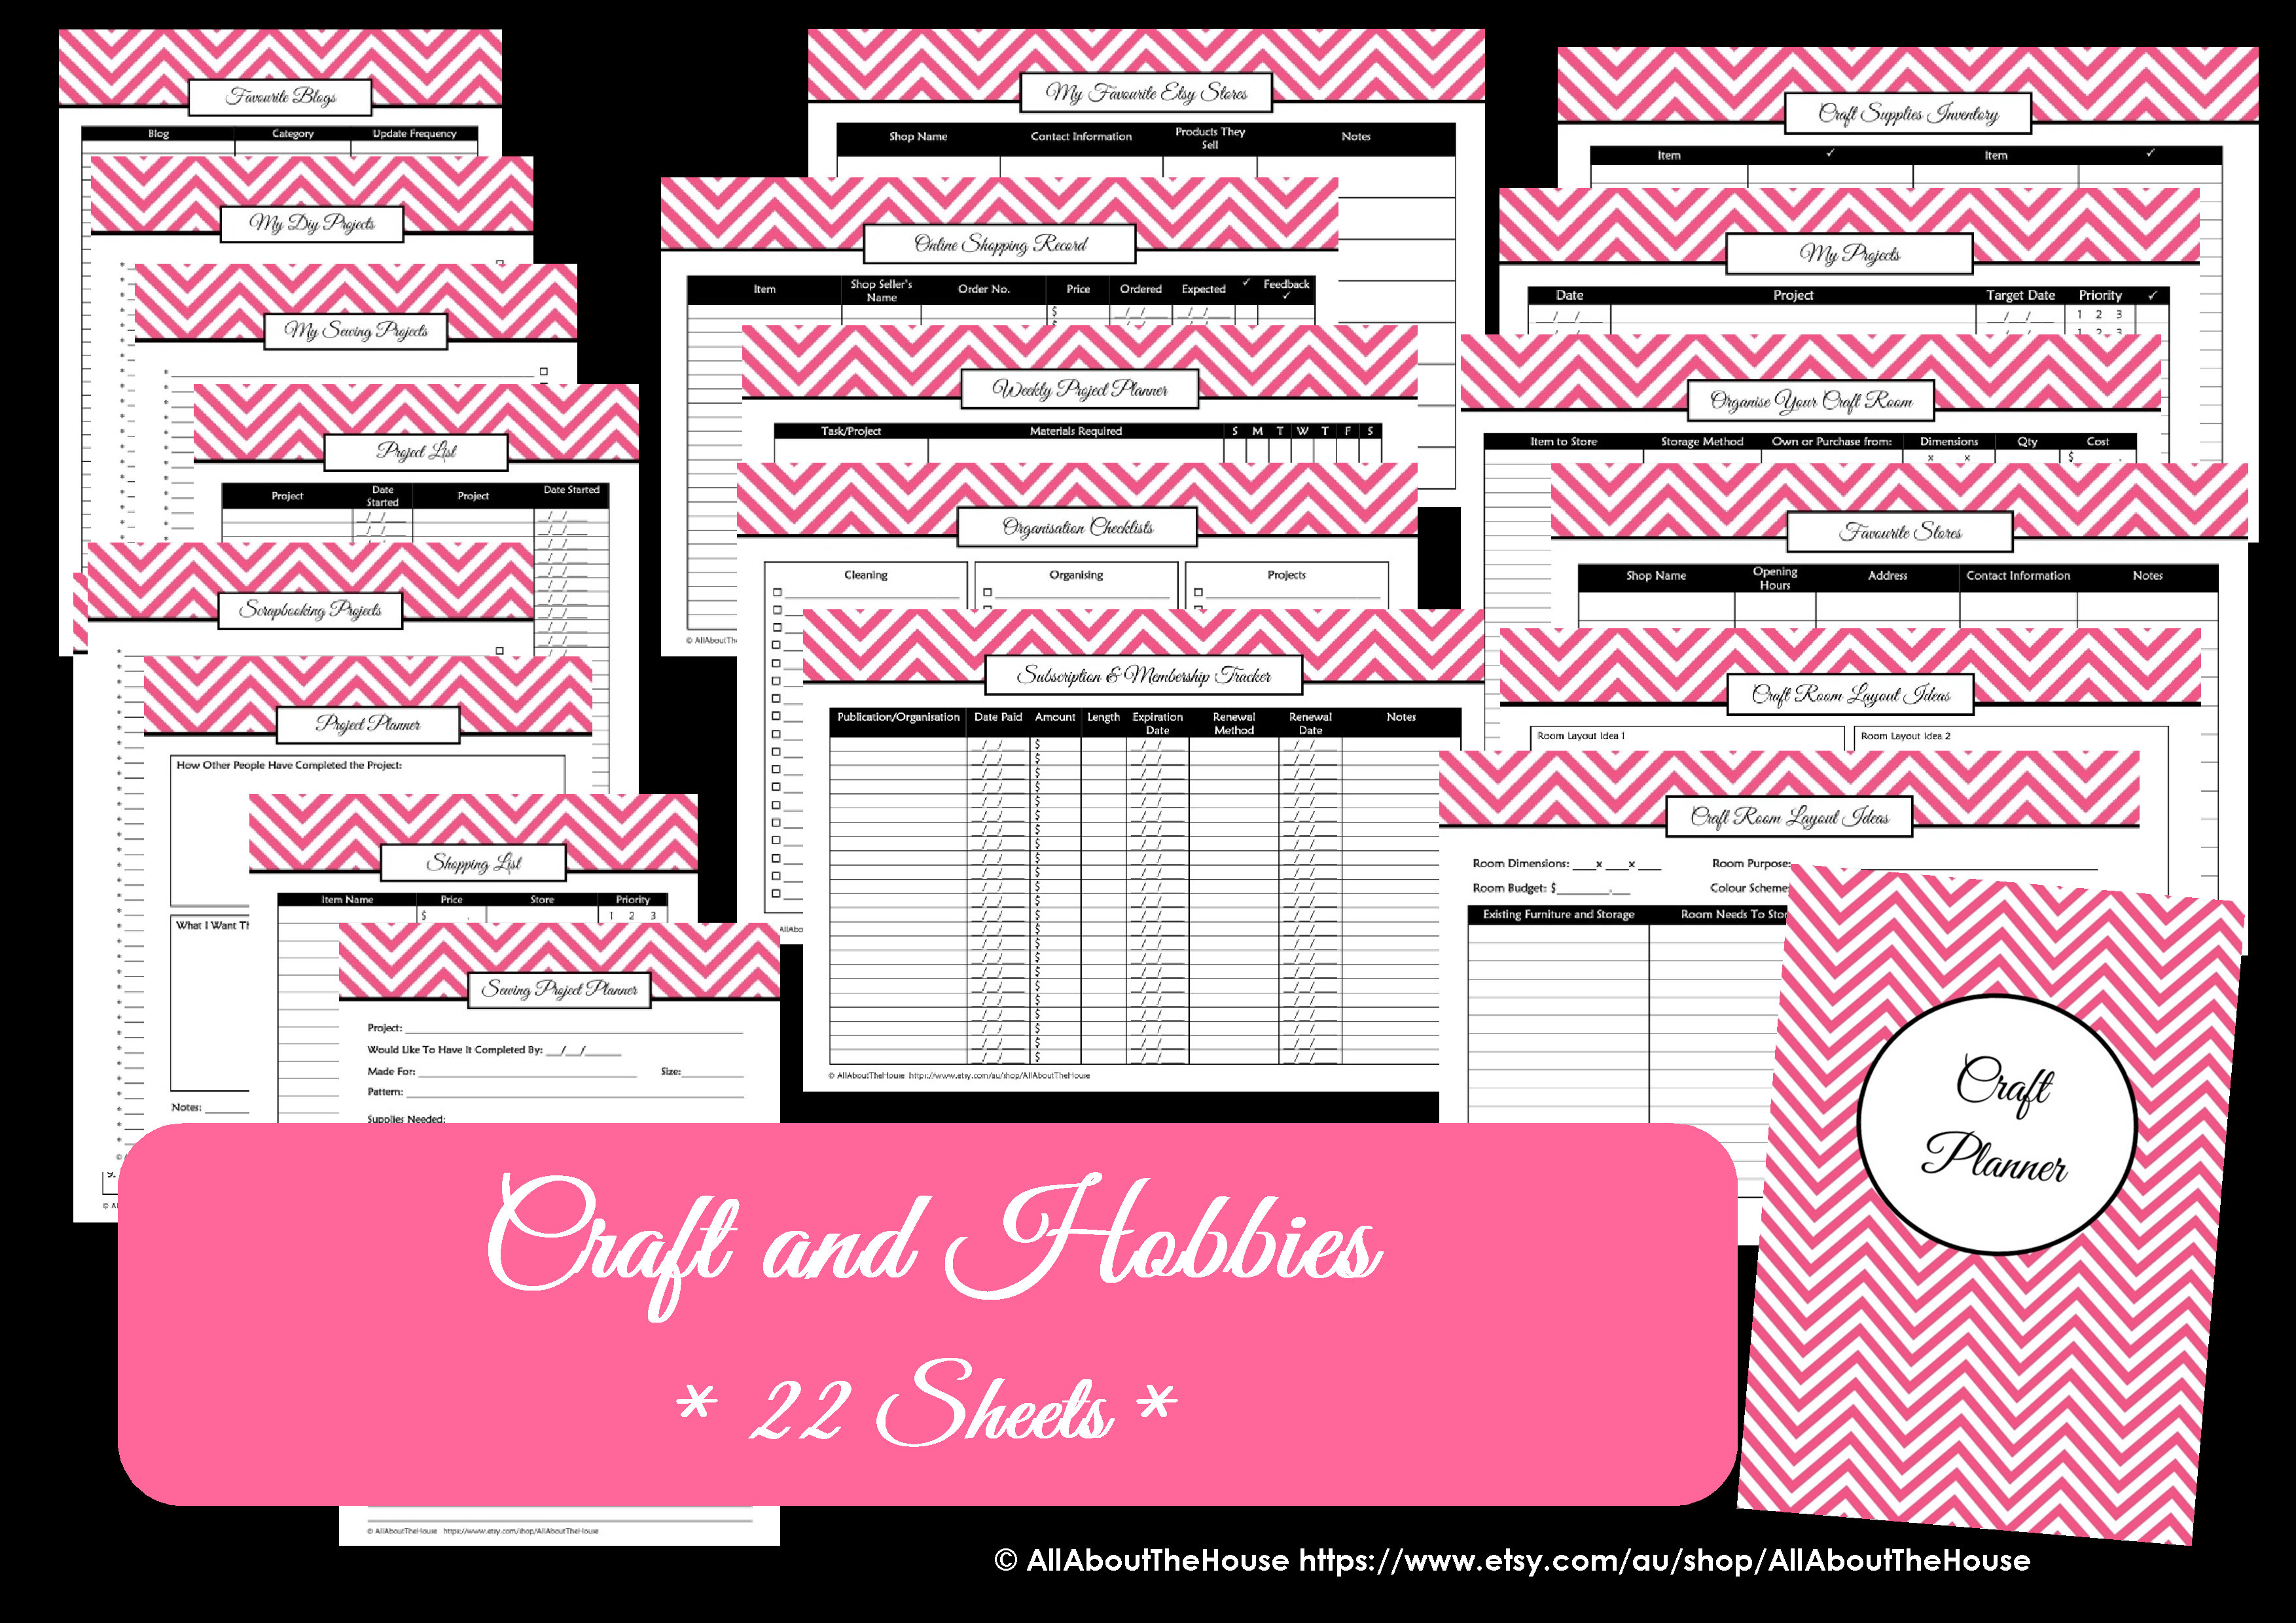 craft-and-hobbies-printable-planner-project-planner-sewing-craft-room